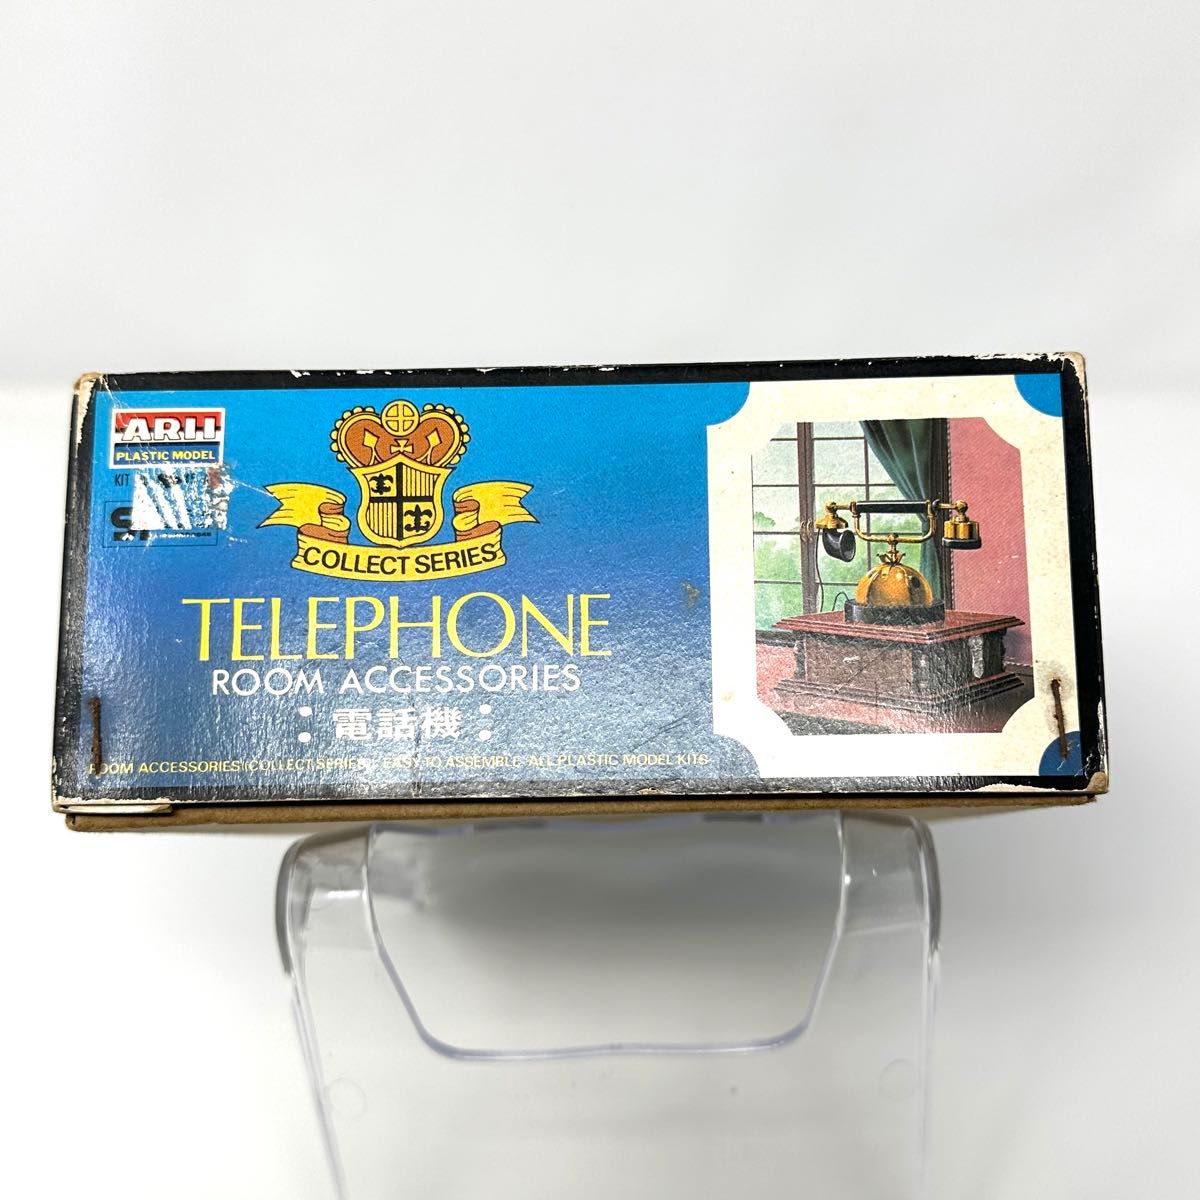 ALLI COLLECT SERIES TELEPHONE  電話機プラモデル